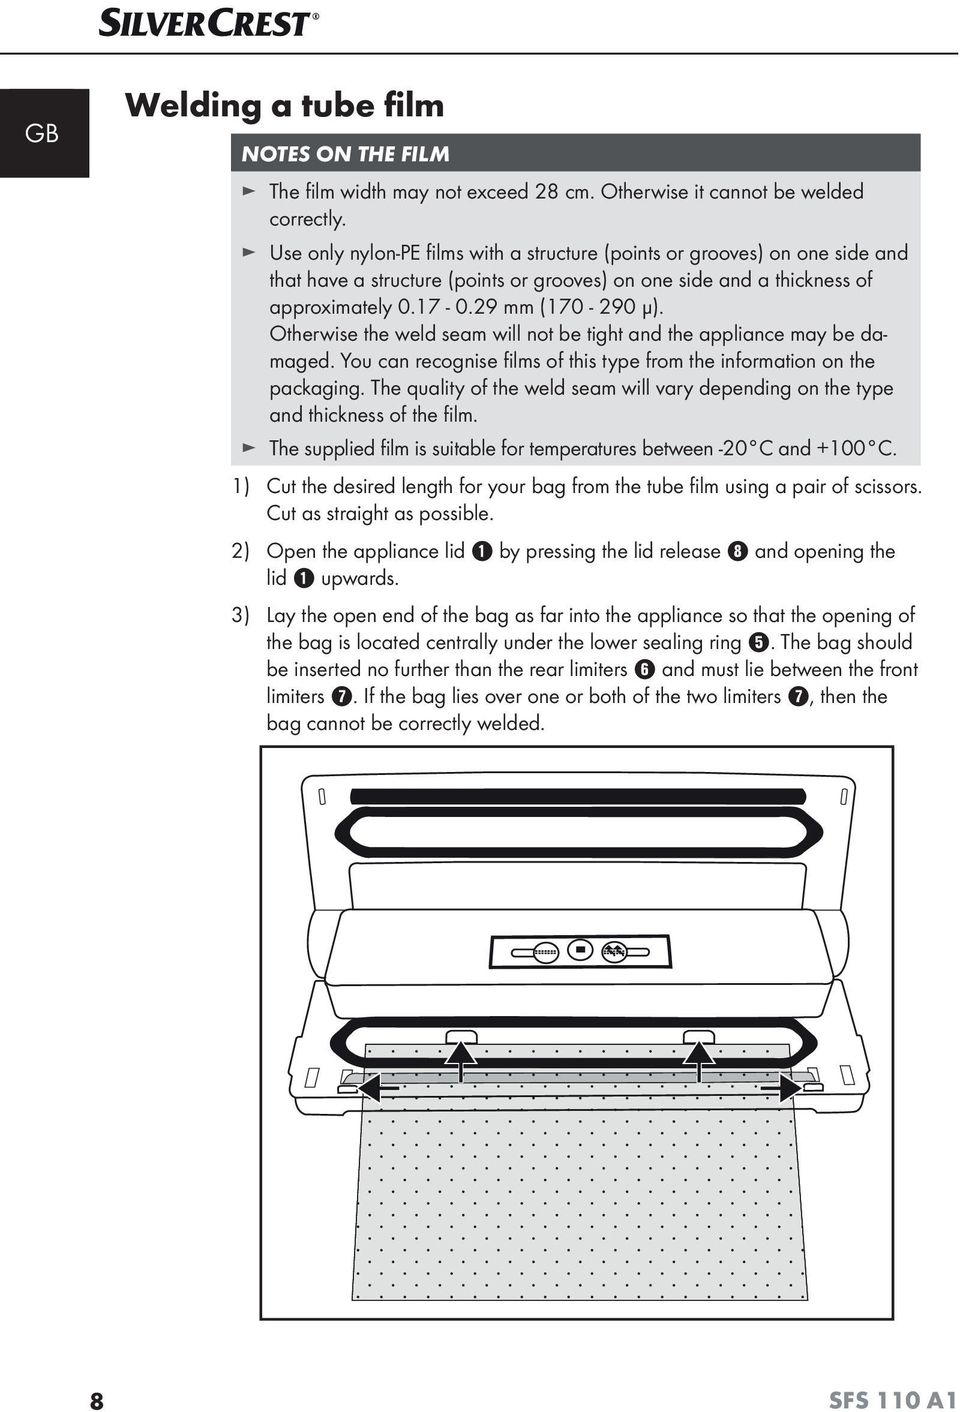 Otherwise the weld seam will not be tight and the appliance may be damaged. You can recognise films of this type from the information on the packaging.